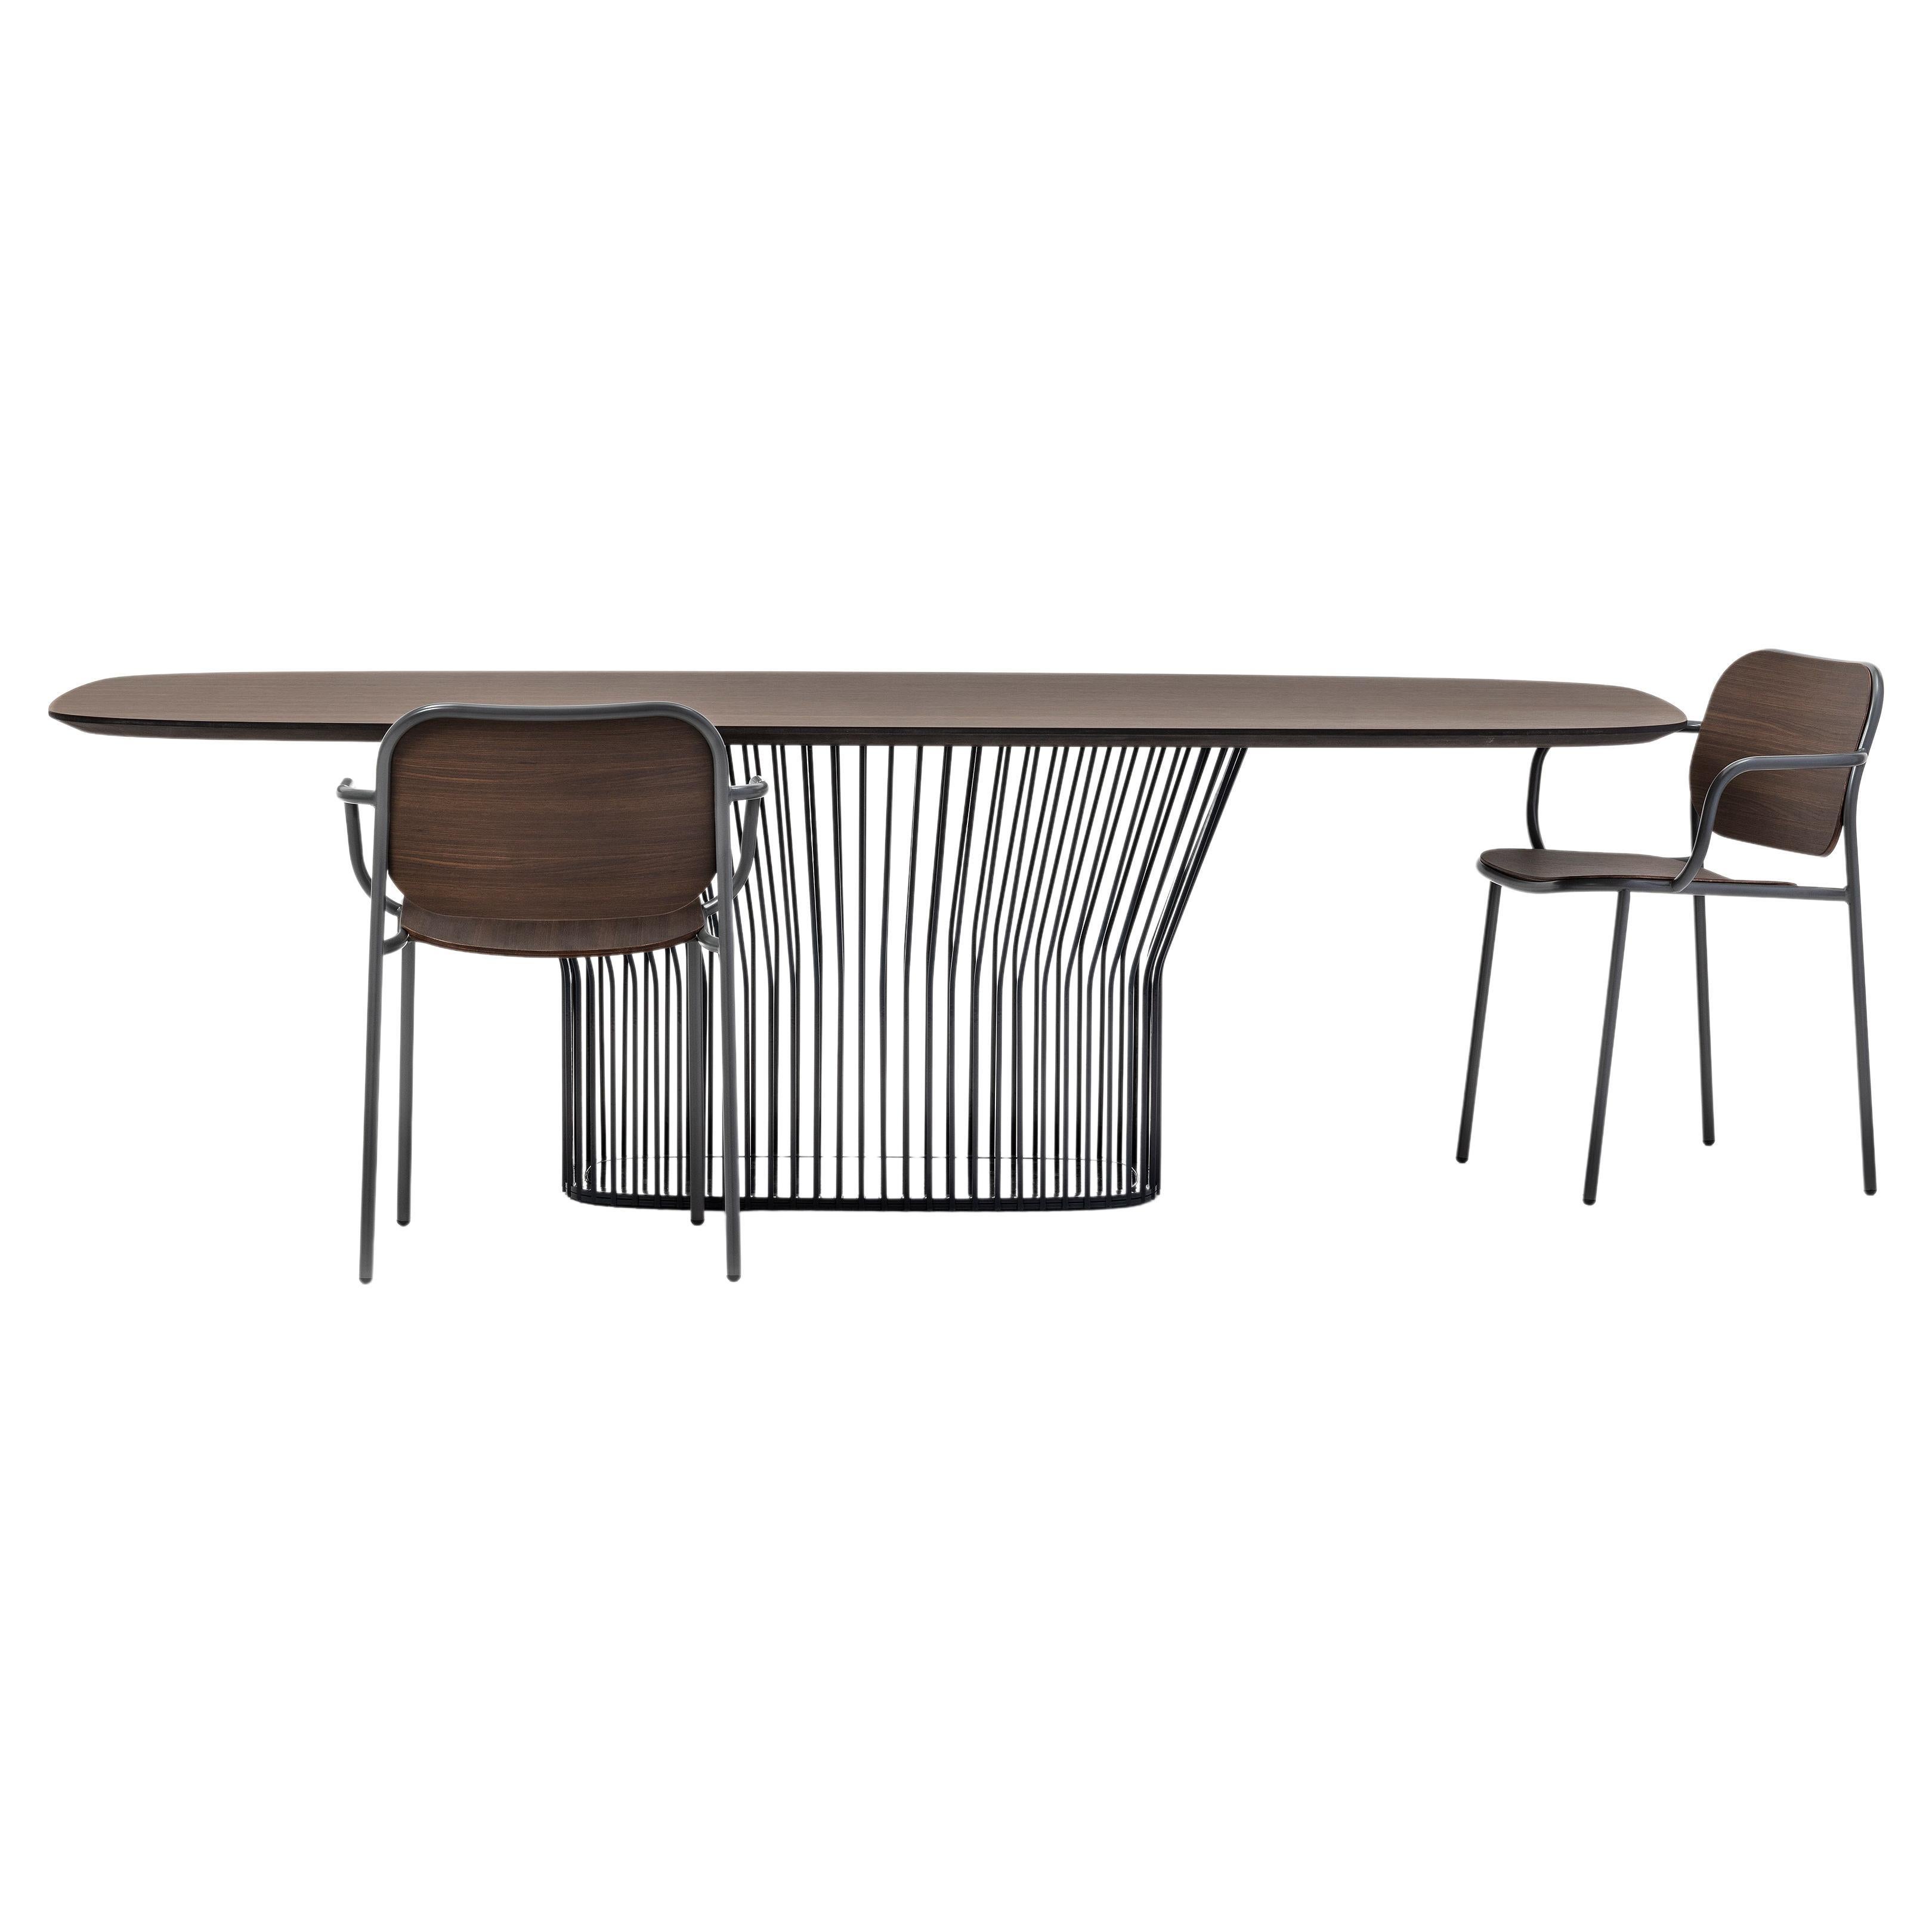 A collection of dining tables in two shapes, multiple sizes and multiple finishes to fit into all types of domestic or contract spaces and harmonize with the style of the environment. The metal base with an original and dynamic design is made up of